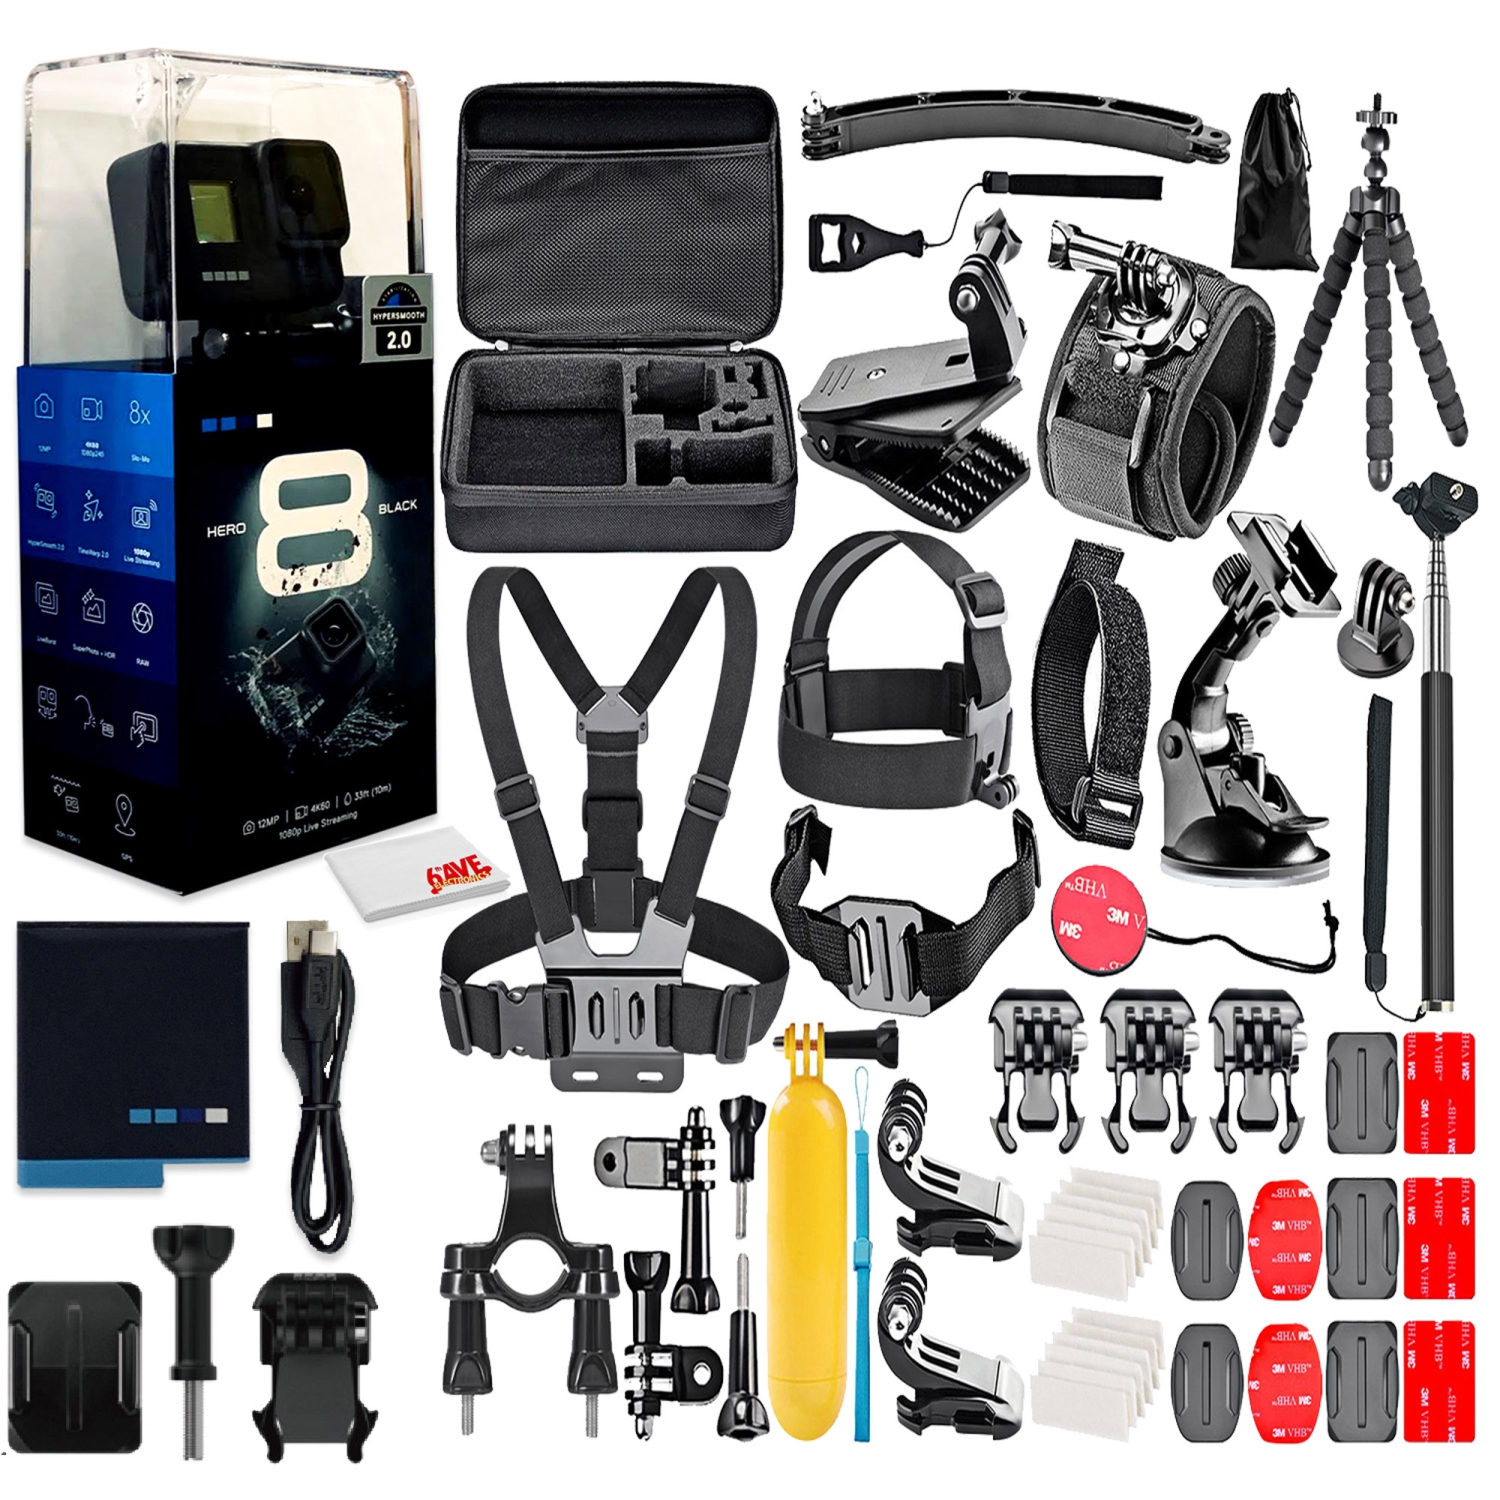 GoPro HERO8 Black Digital Action Camera - With 50 Piece Accessory Kit - All You need Bundle